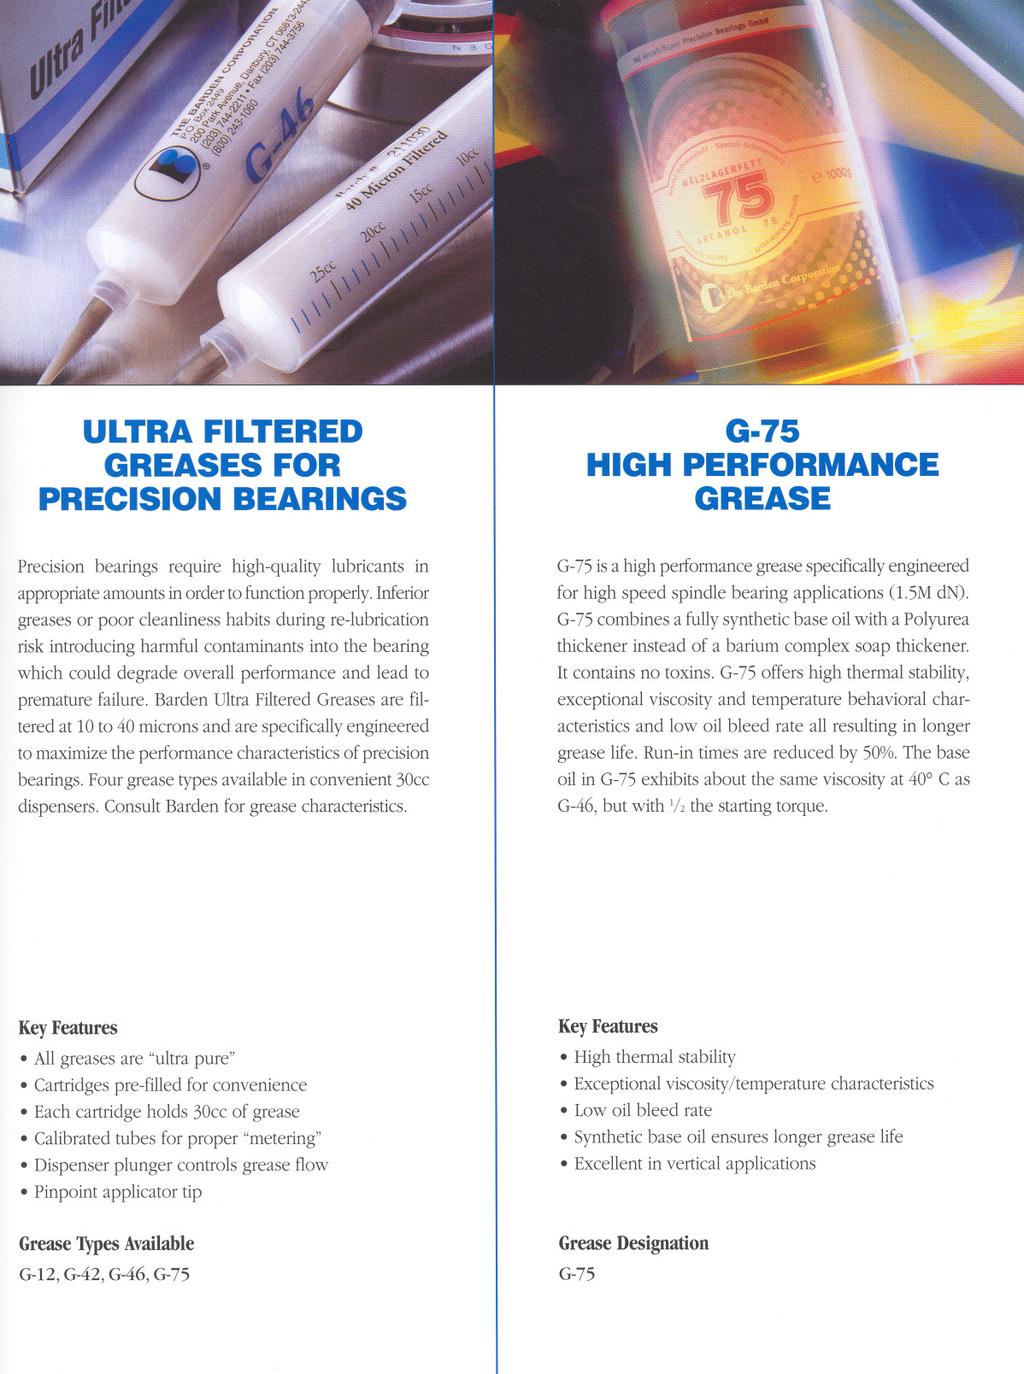 ULTRA FILTERED GREASES FOR PRECISION BEARINGS G-75 HIGH PERFORMANCE GREASE Precision bearings require high-quality lubricants in appropriate amounts in order to function properly.